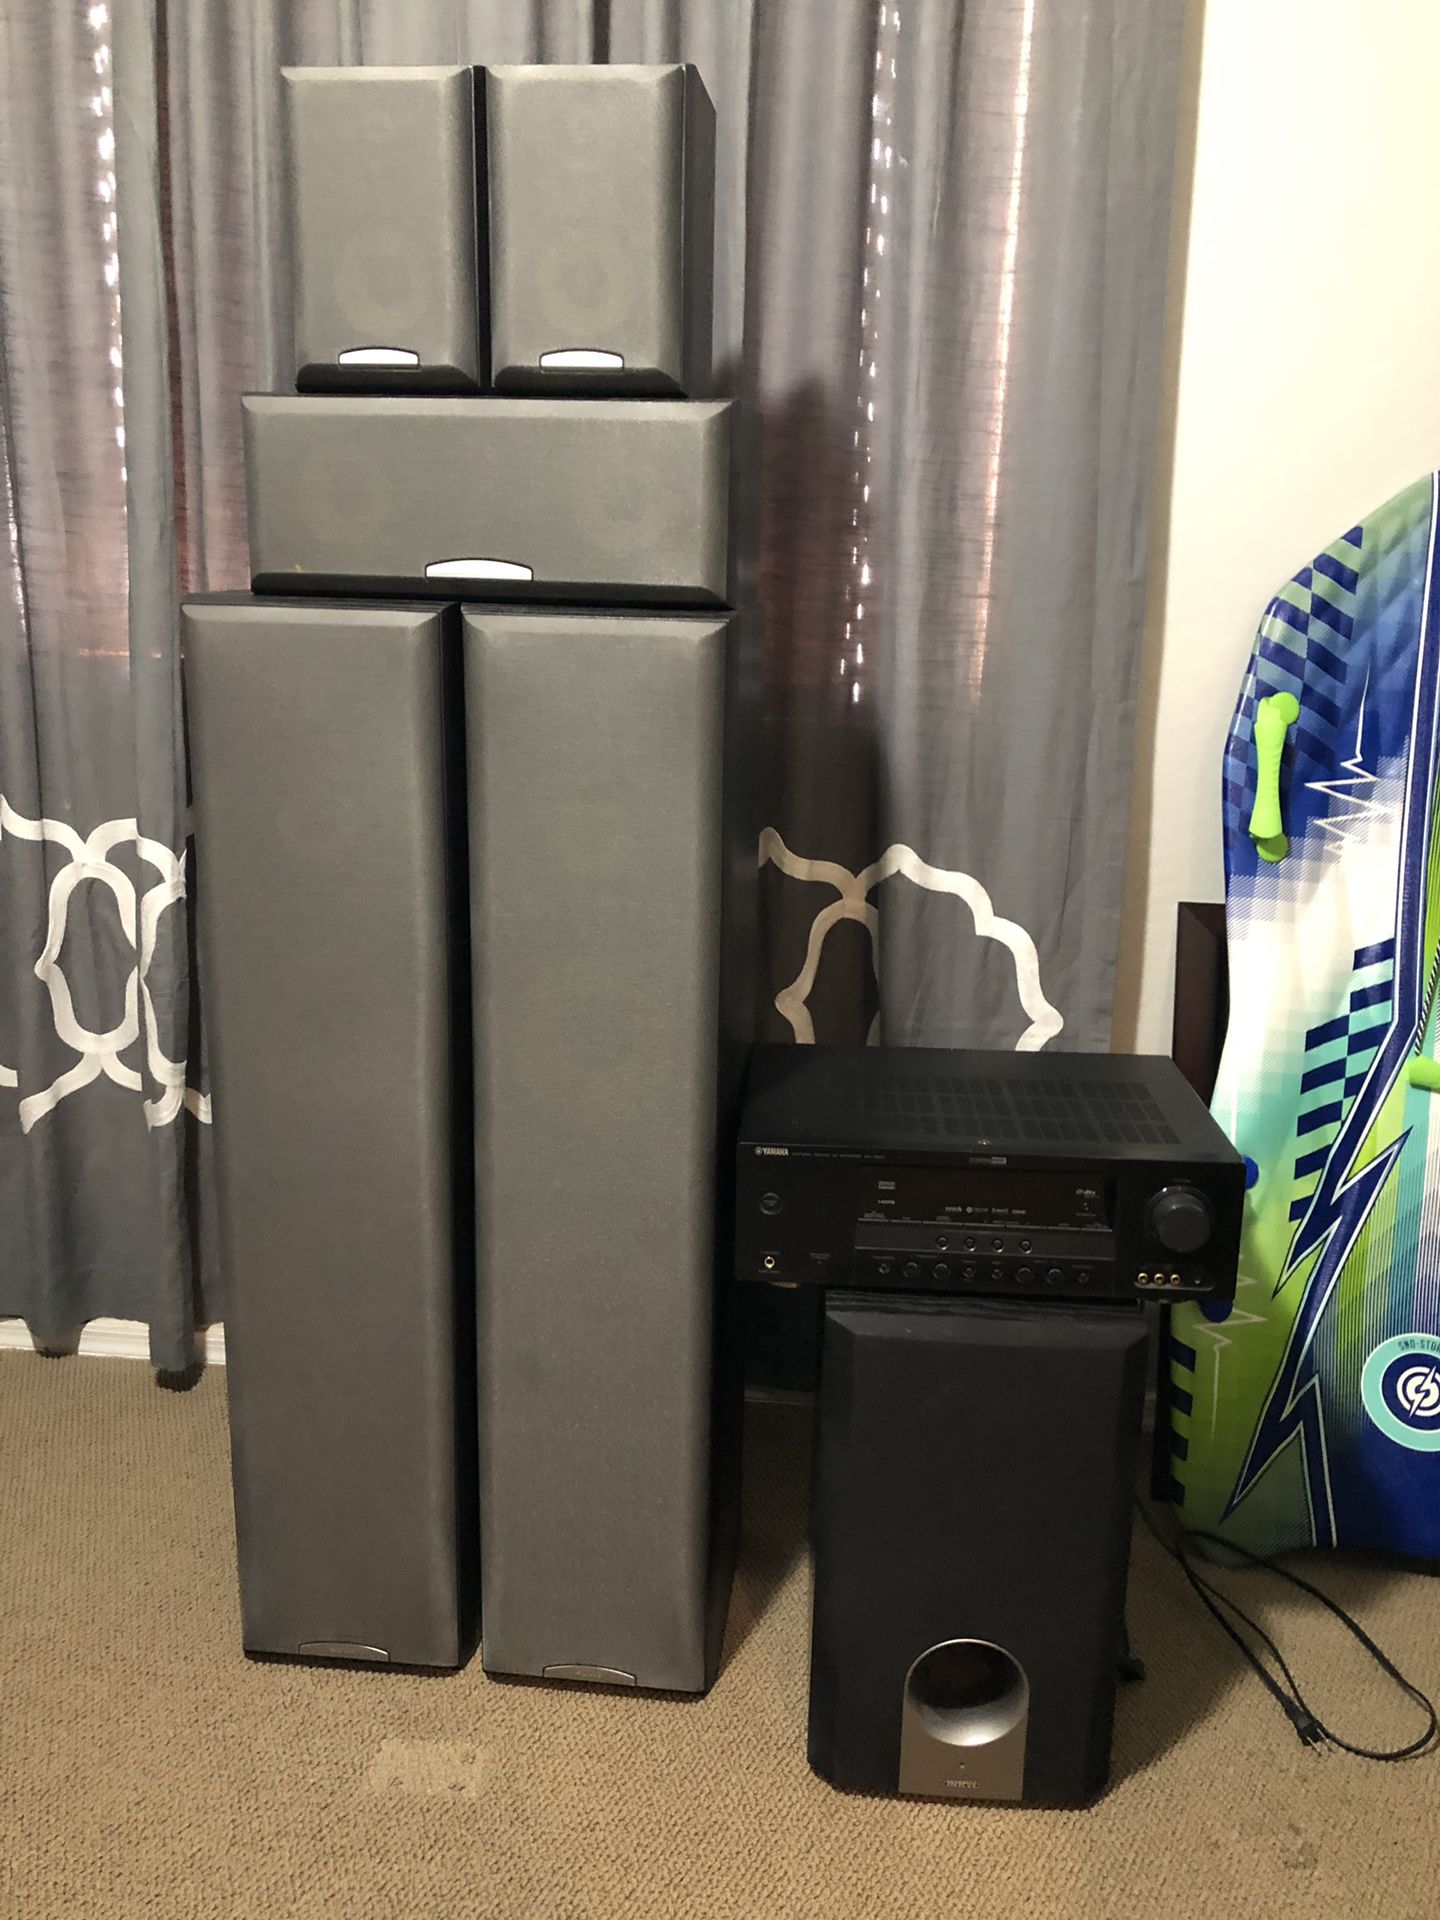 Sony floor speakers with Yamaha A/V receiver